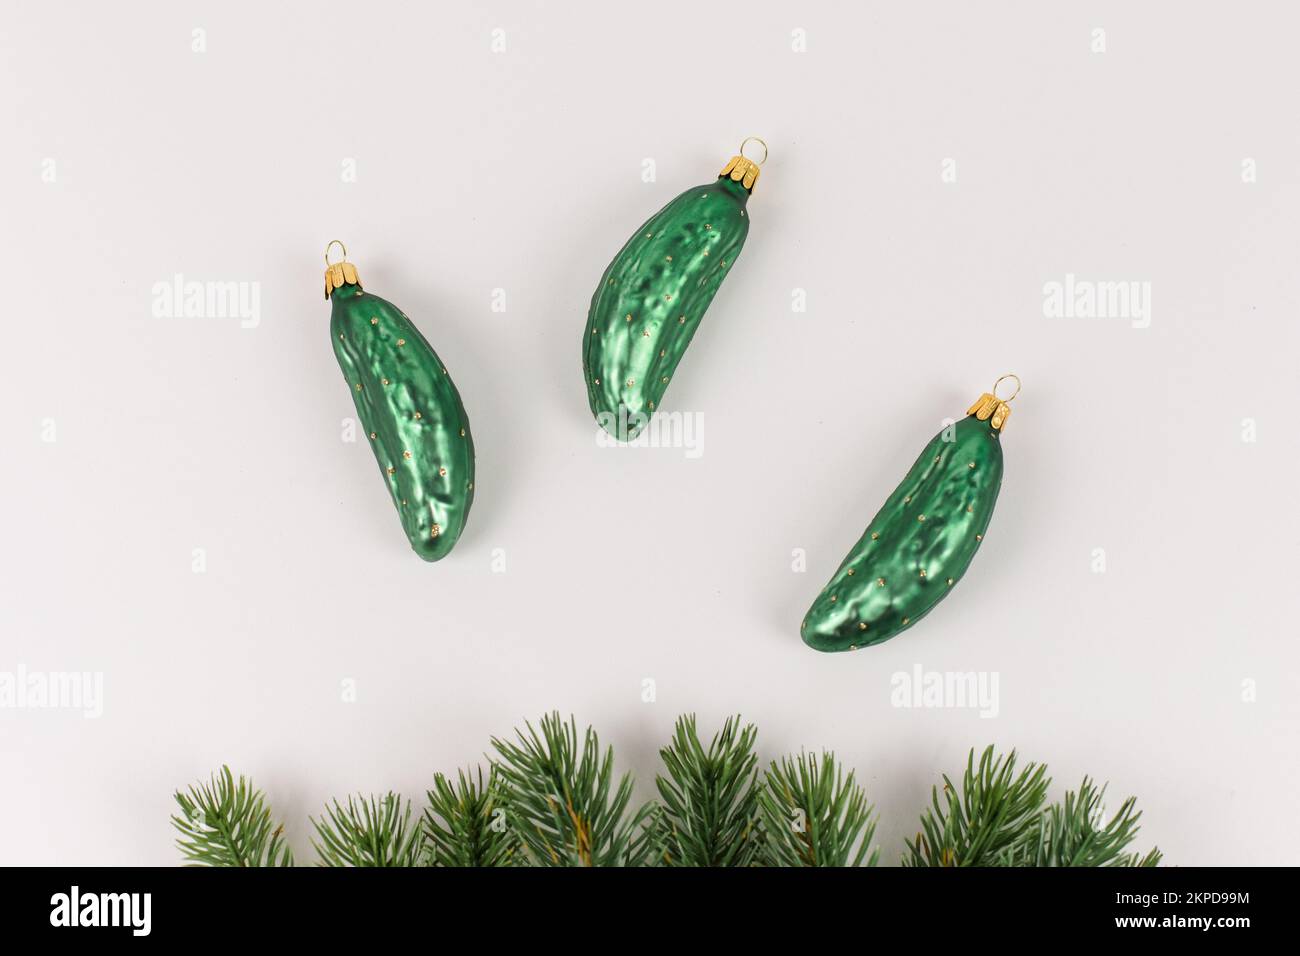 Three Christmas tree baubles in the shape of a cucumber are lying on a white background. Fir branches decorate the picture. Stock Photo